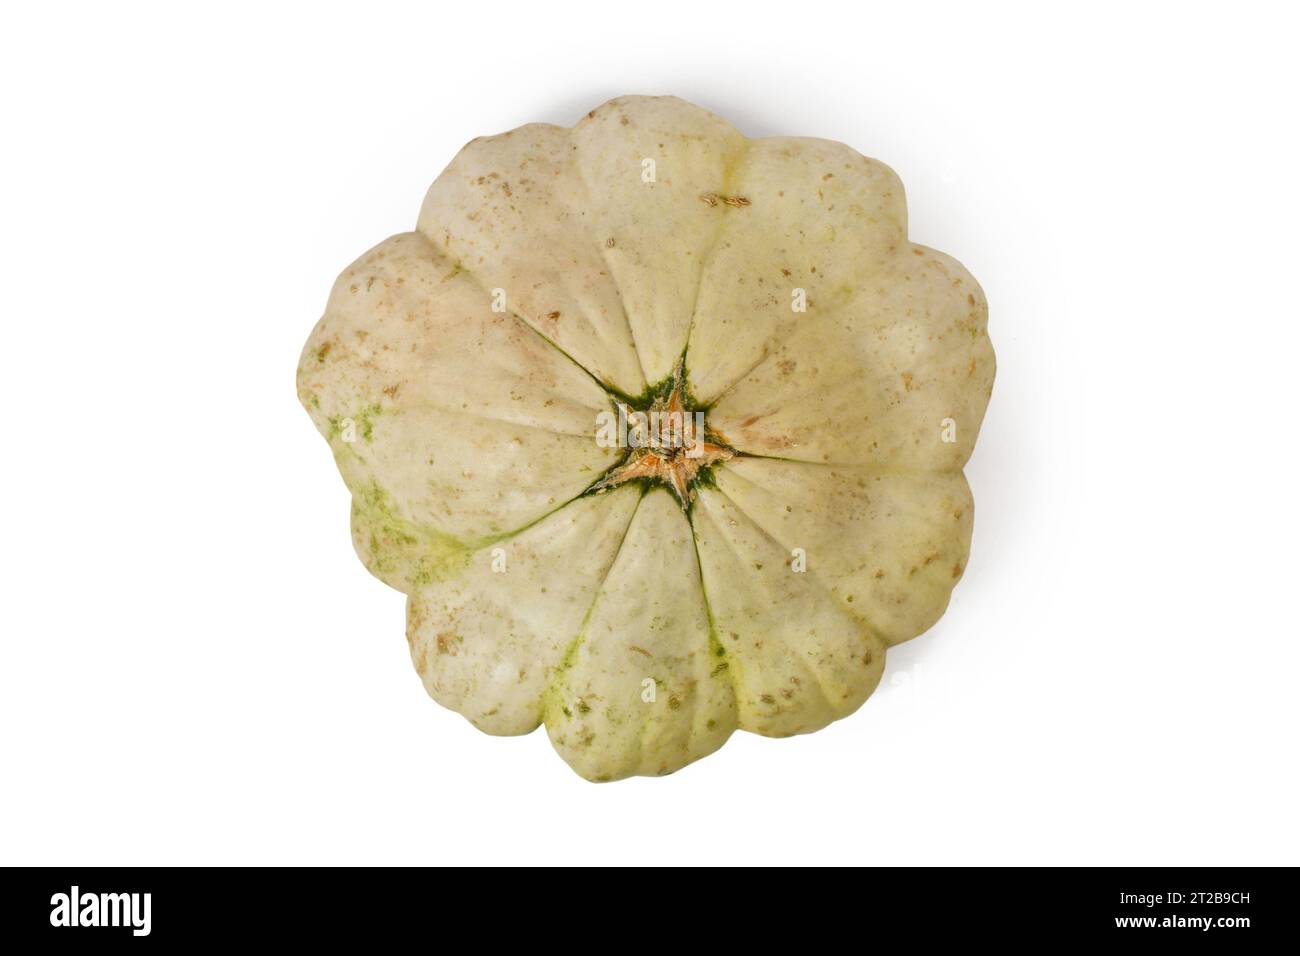 Top view of Pattypan squash with round and shallow shape and scalloped edges on white background Stock Photo